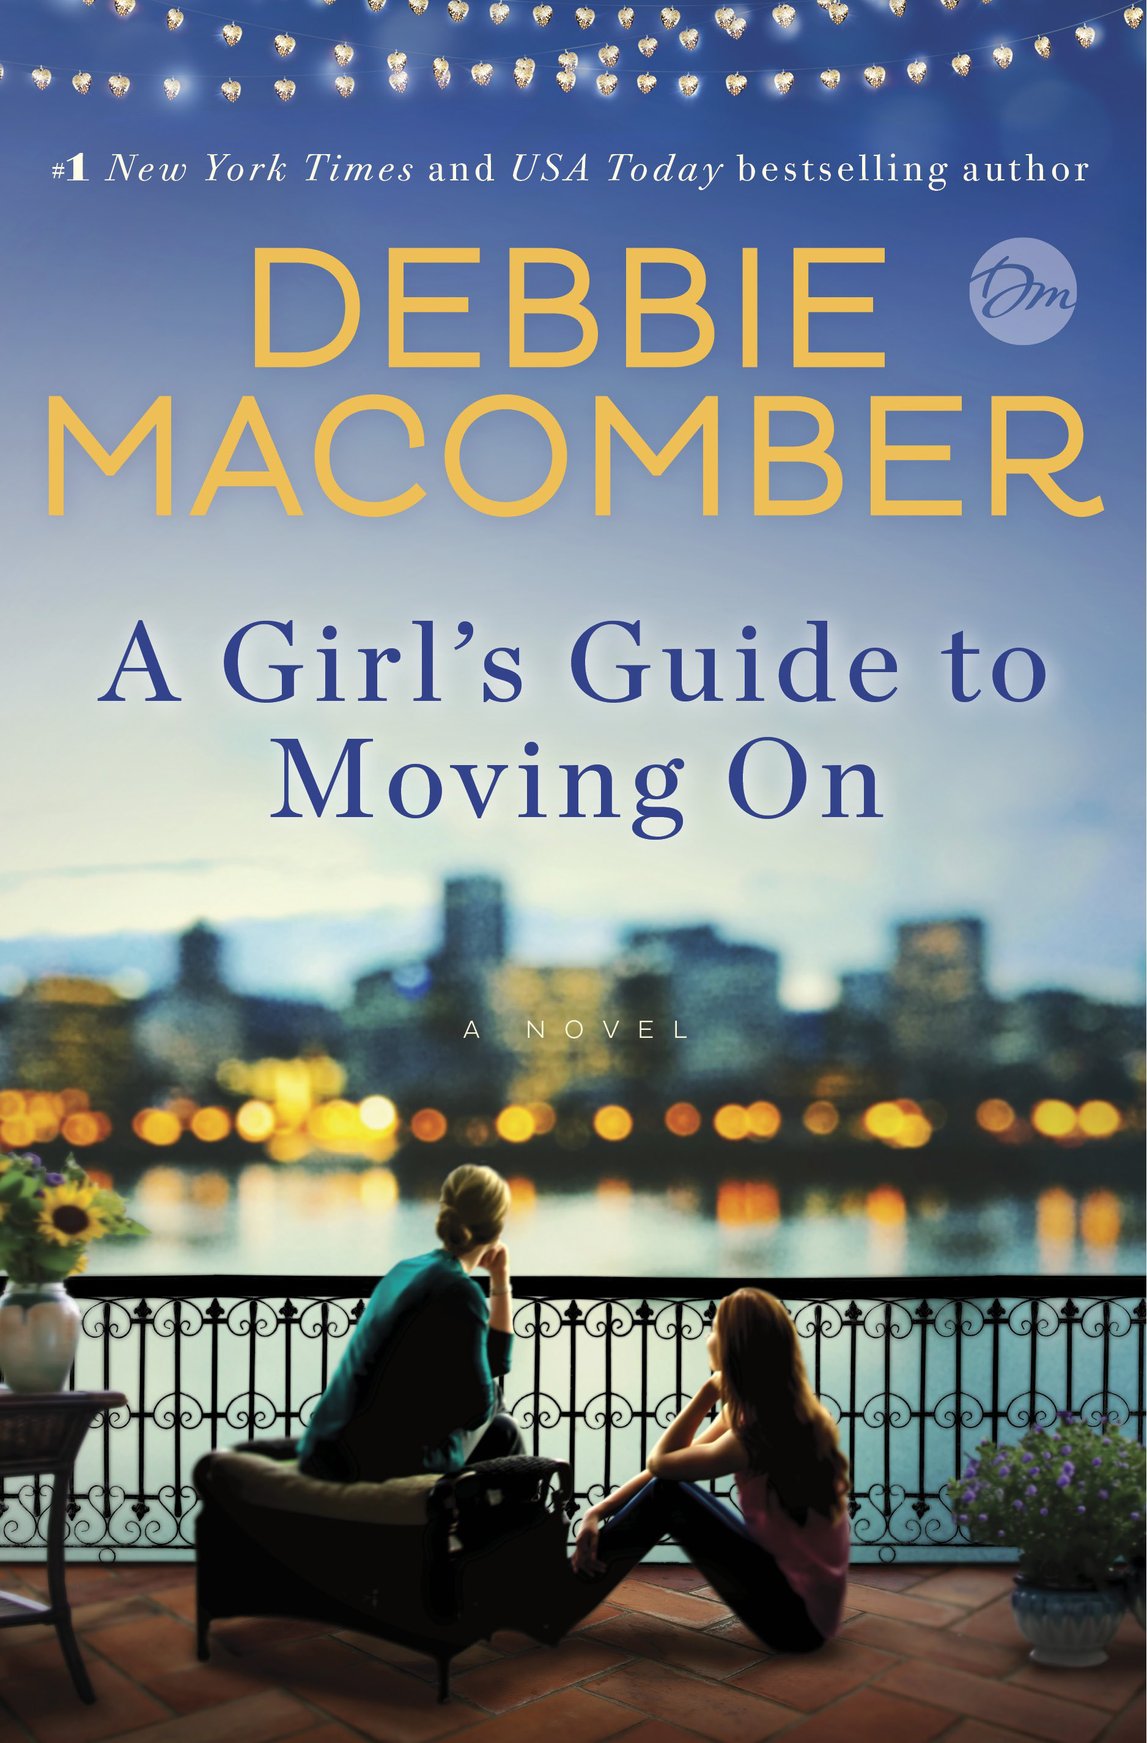 A Girl's Guide to Moving On (2016) by Debbie Macomber